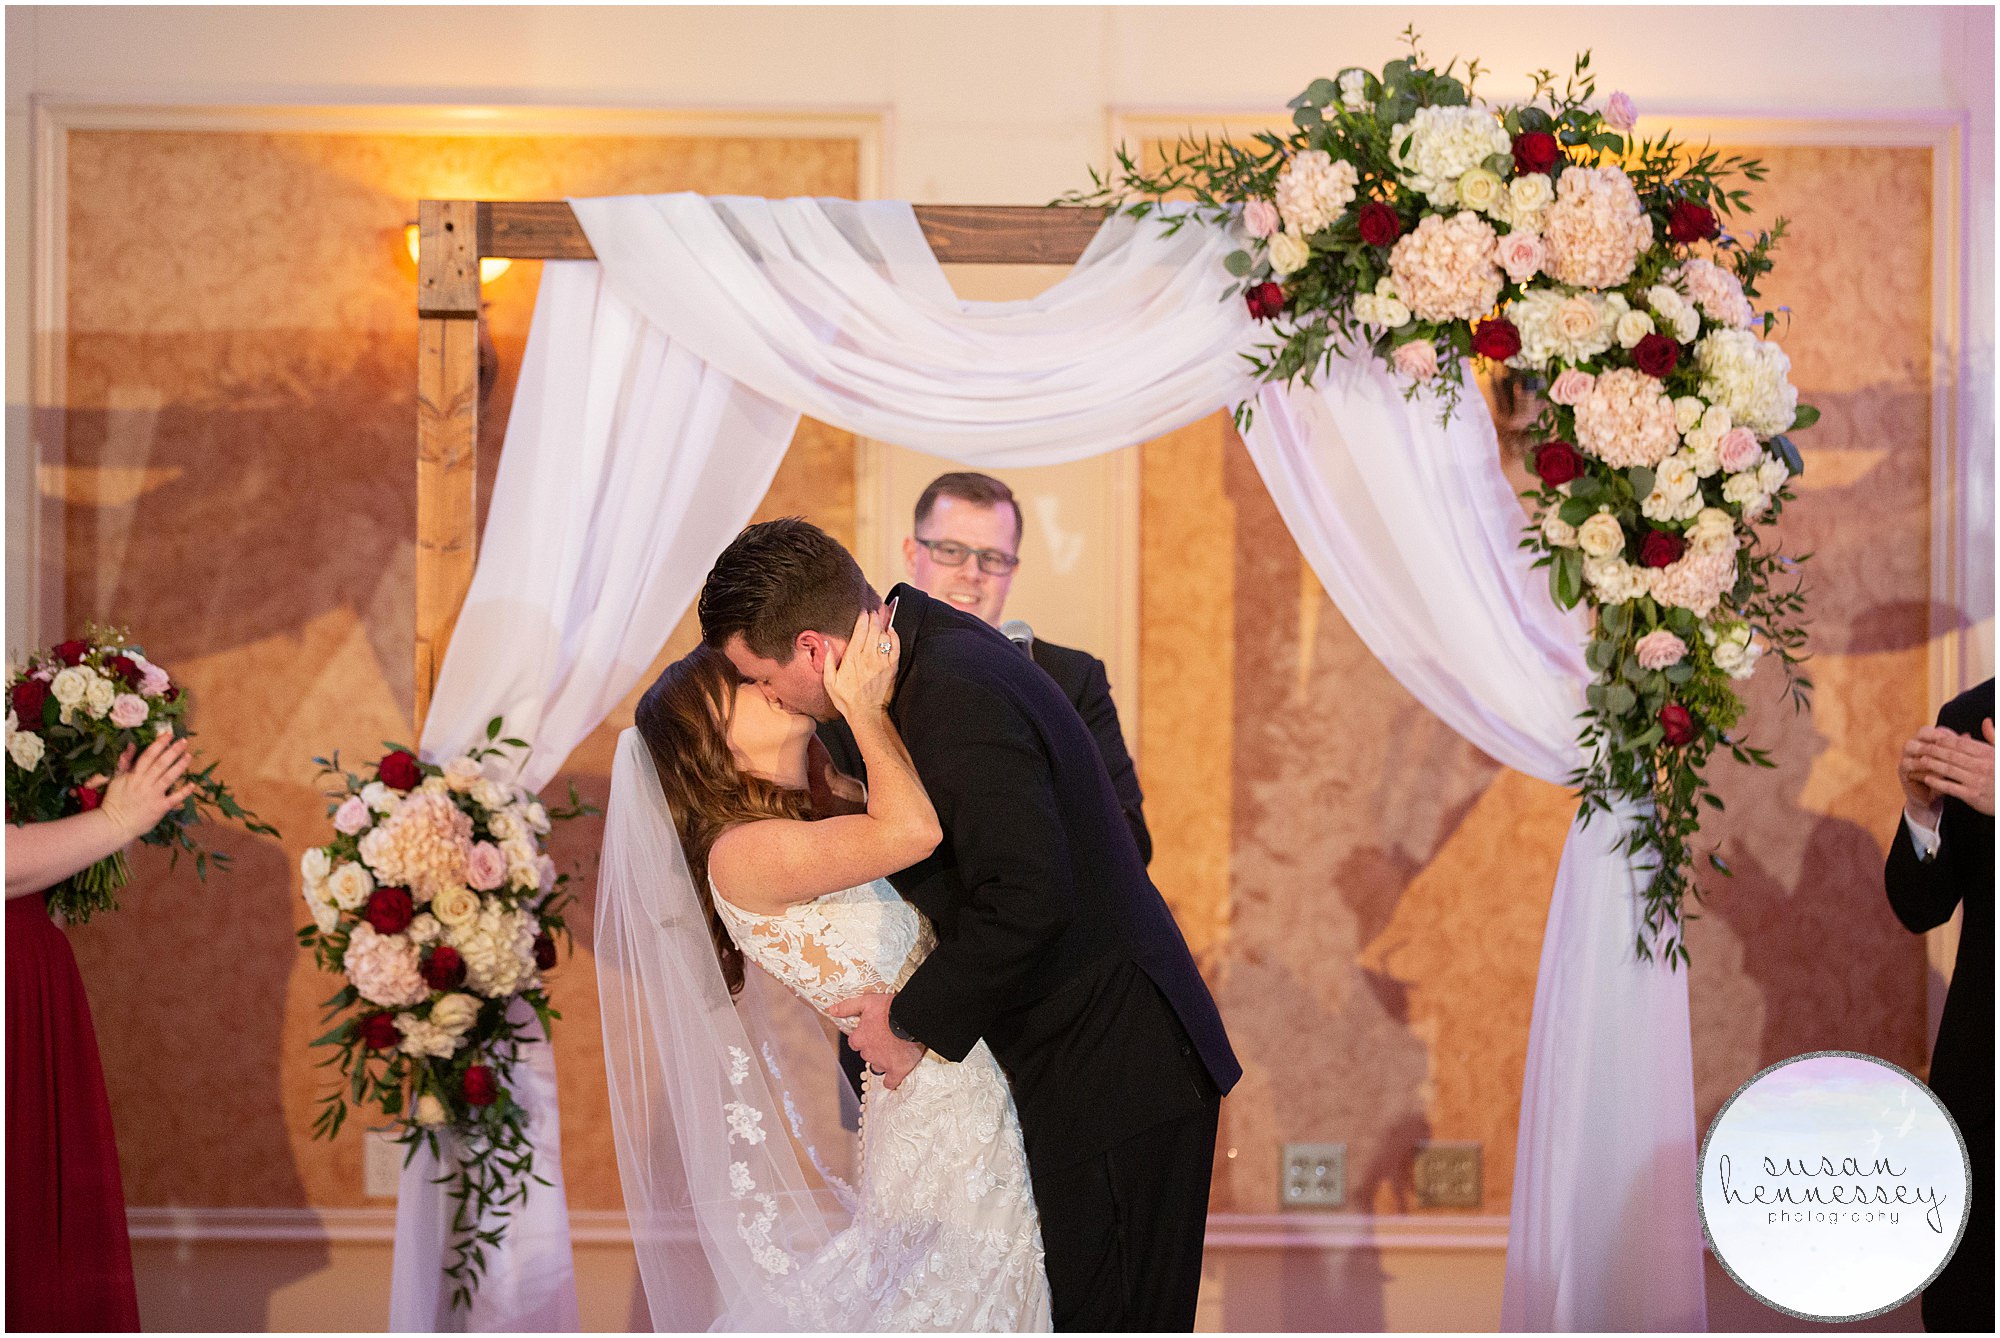 Bride and groom kiss at Indoor winter ceremony at the merion